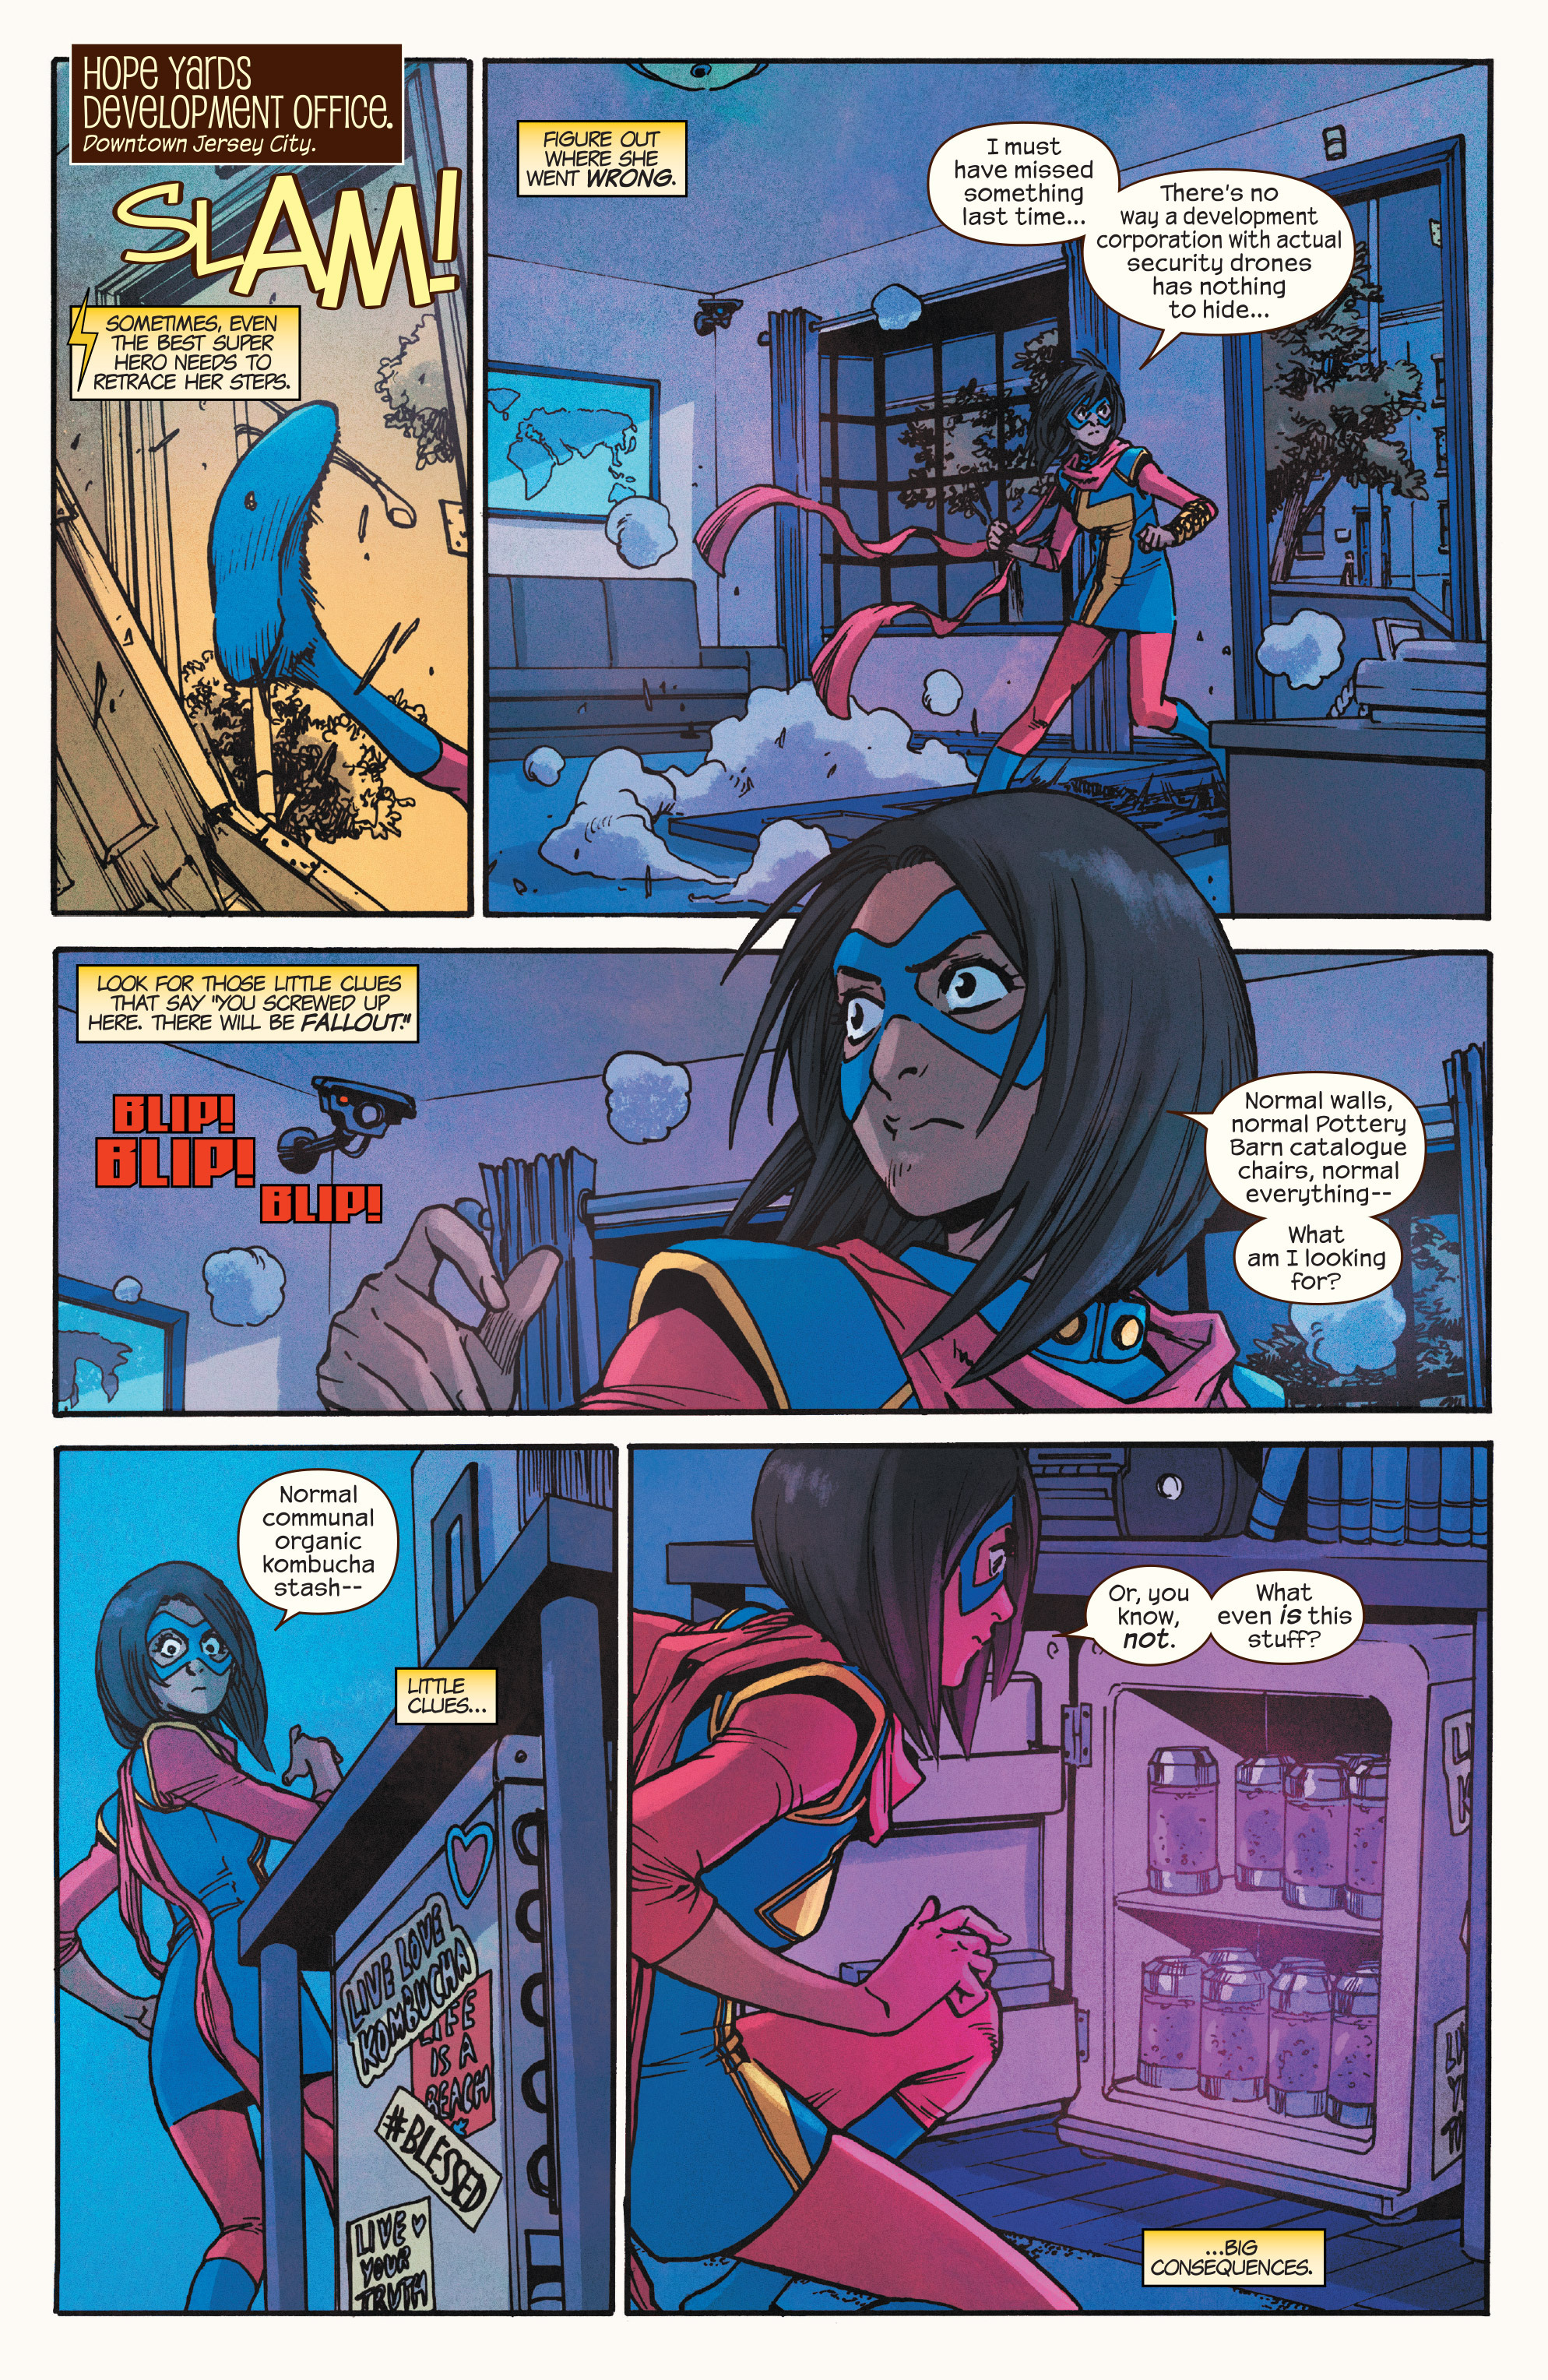 Ms. Marvel (2015-): Chapter 2 - Page 2